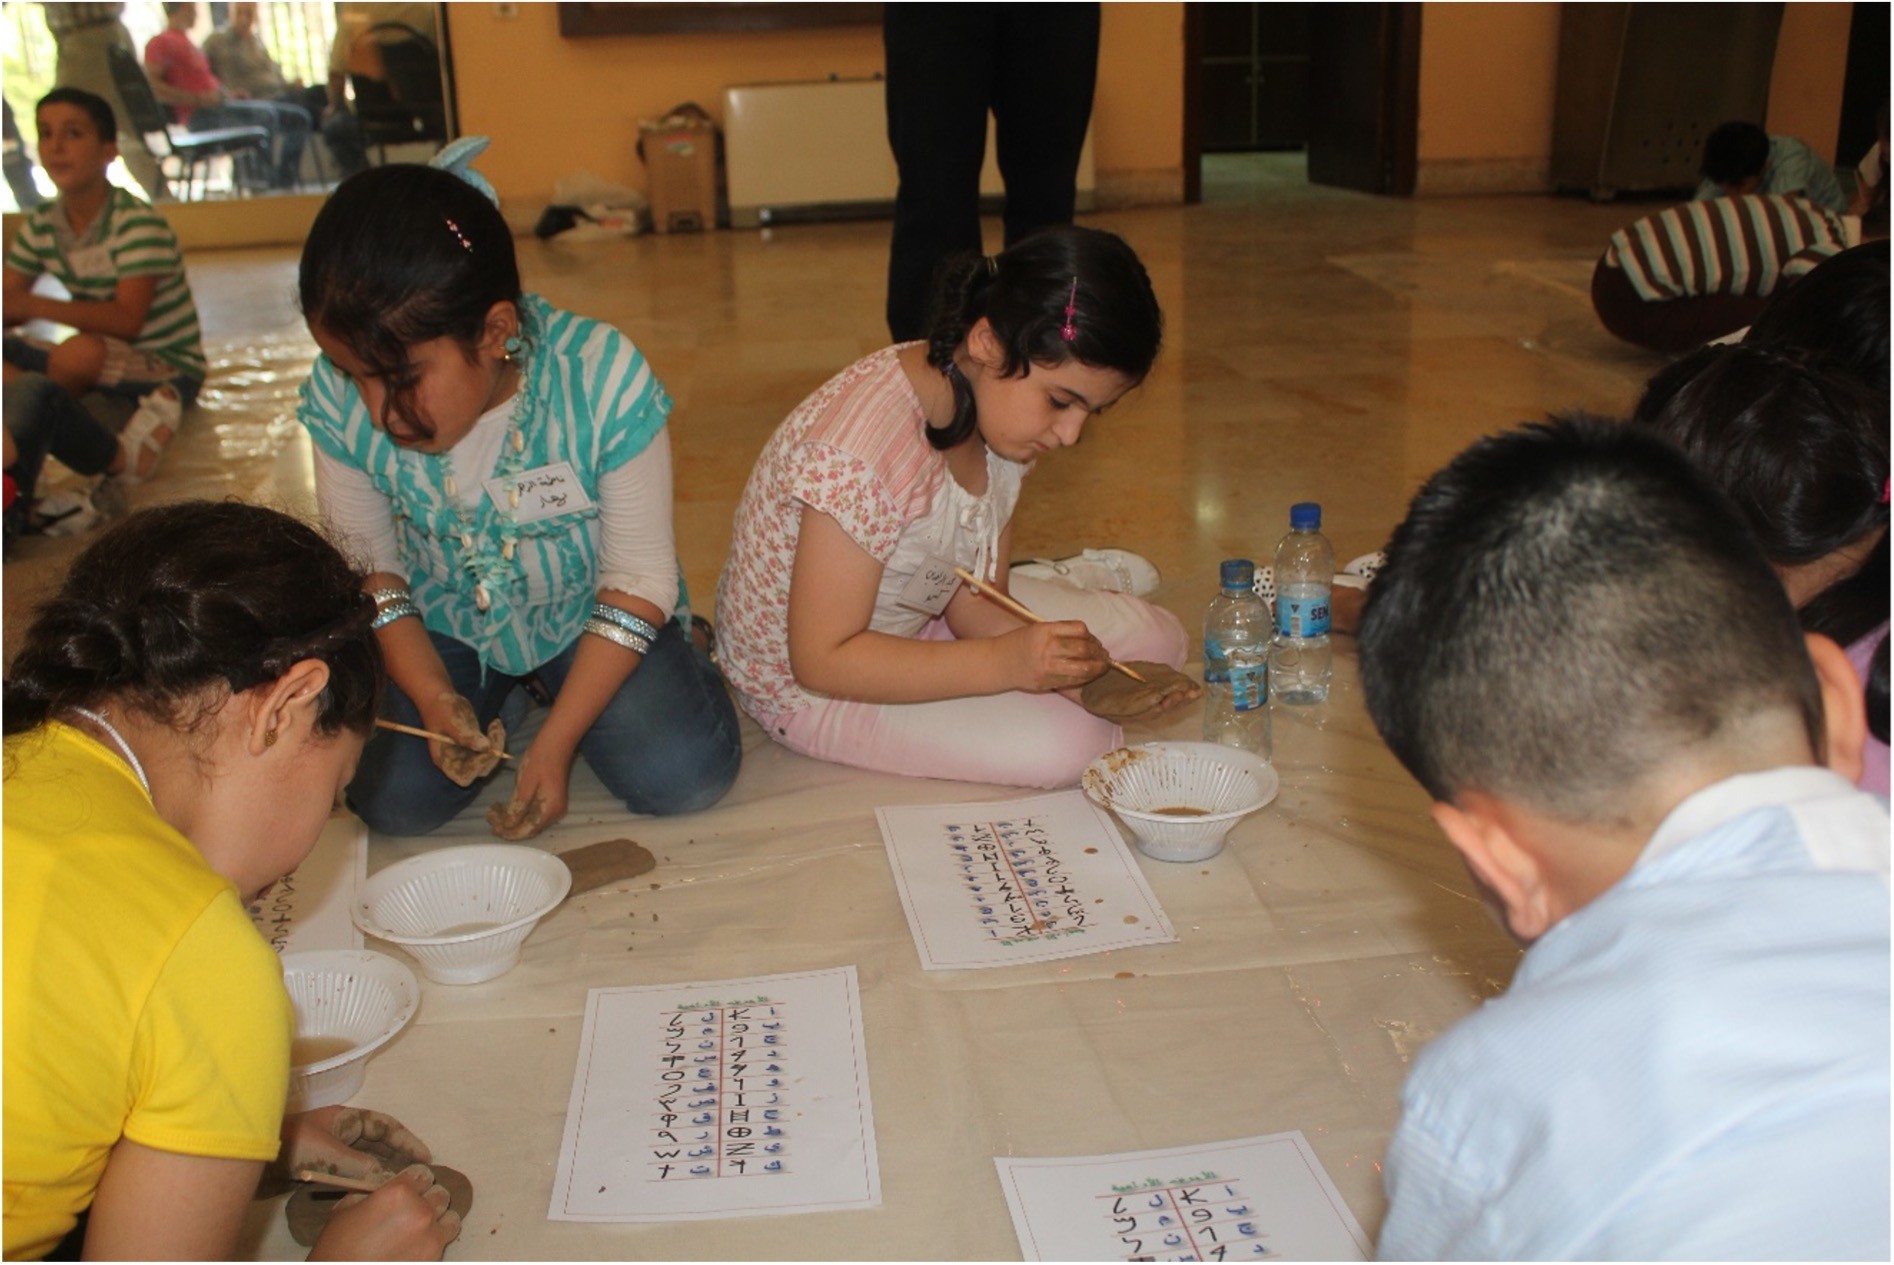 Aleppo Museum activities with children. Photo by Youssef Kanjou, 2012.